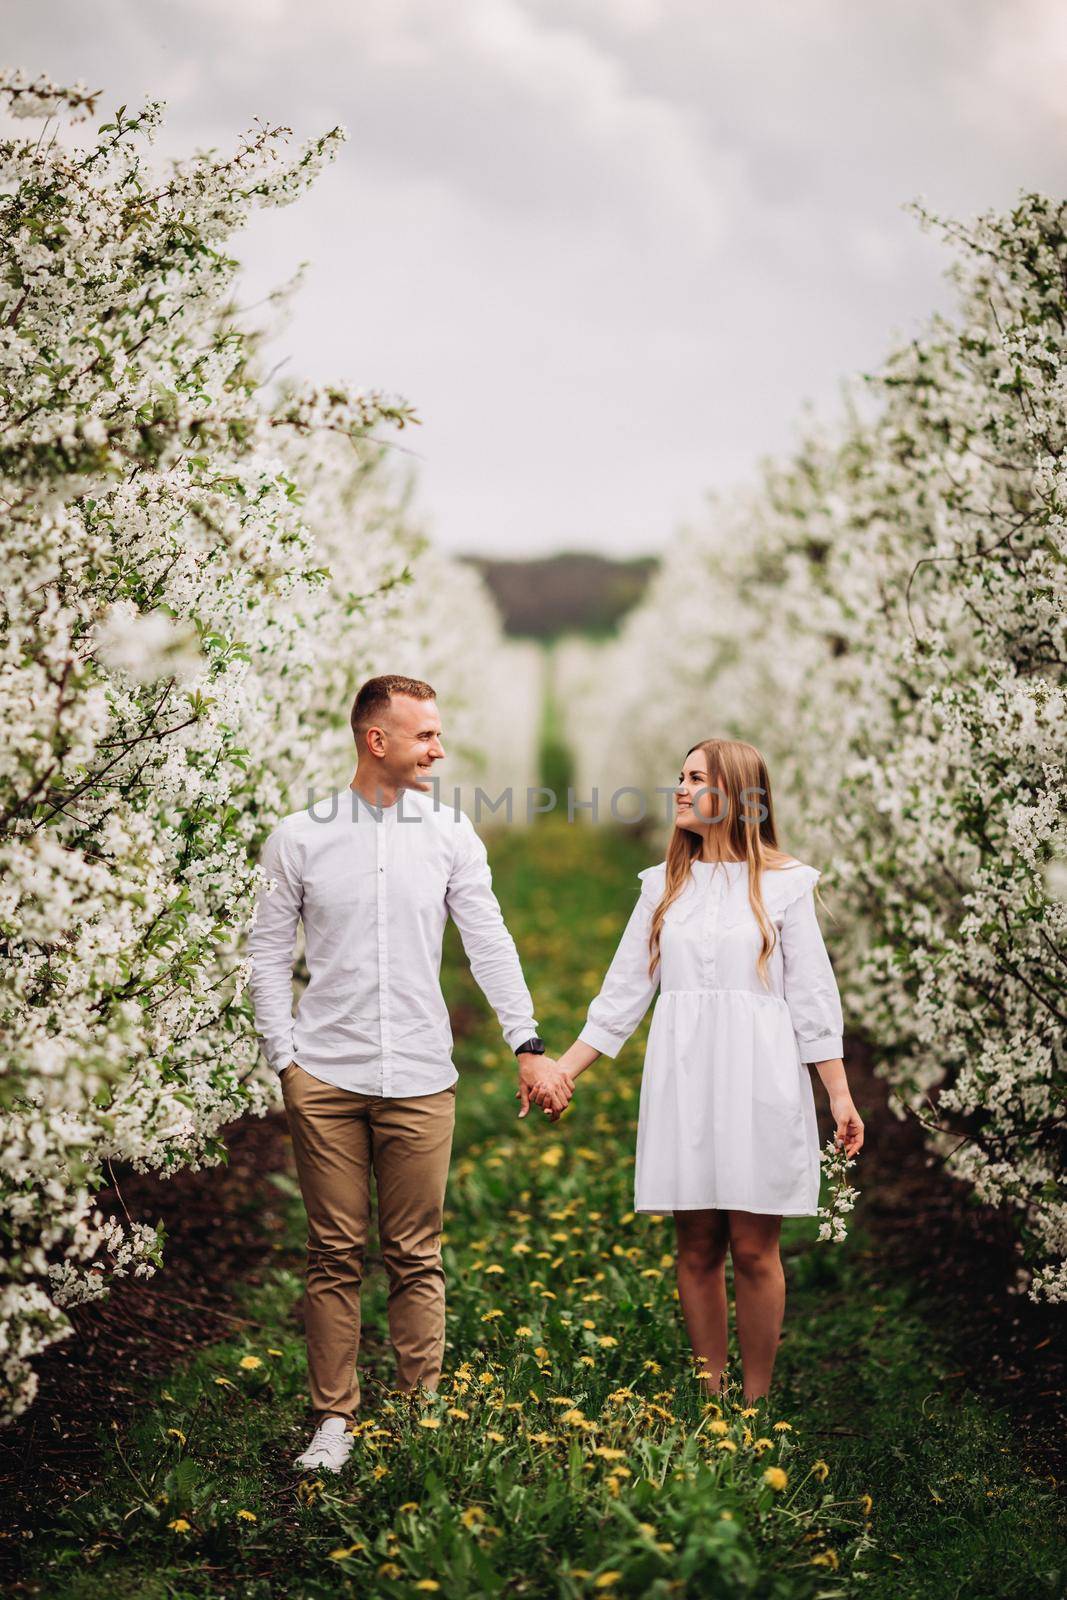 Beautiful young couple in a romantic place, spring blooming apple orchard. Happy joyful couple enjoy each other while walking in the garden. Man holding woman's hand by Dmitrytph